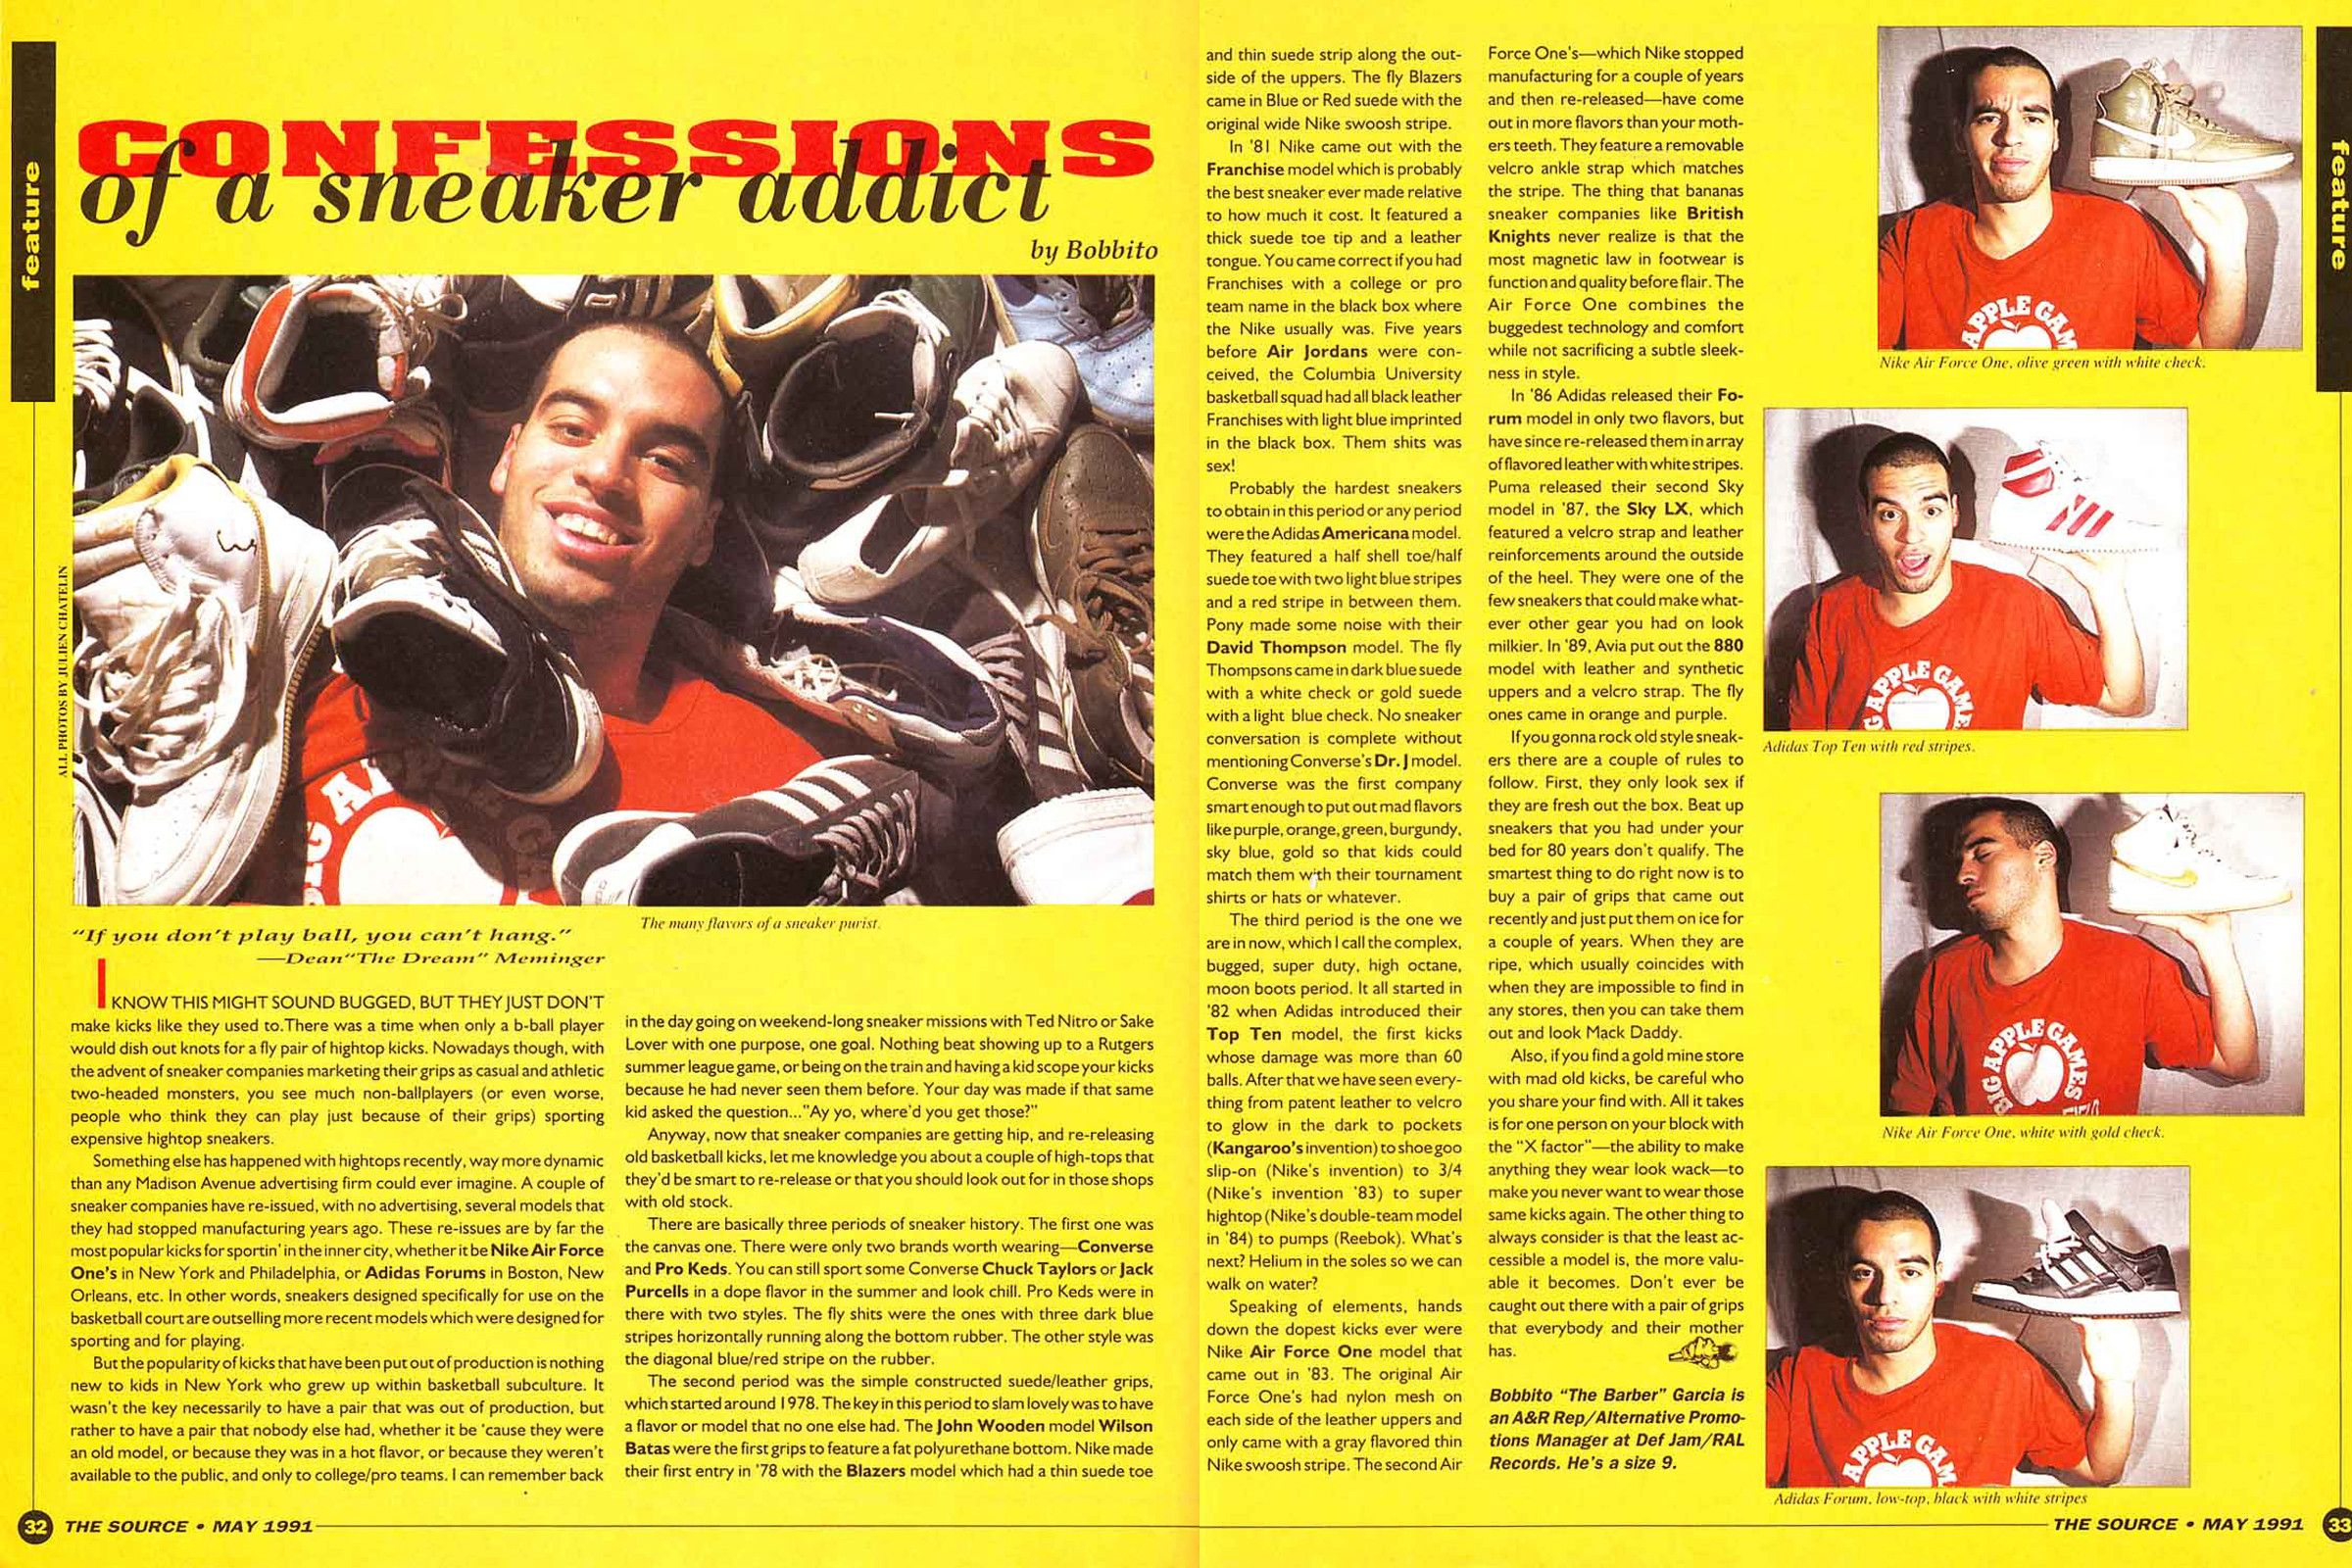 Bobbito Garcia's "Confessions of a Sneaker Addict" article from the May 1991 issue of "The Source"